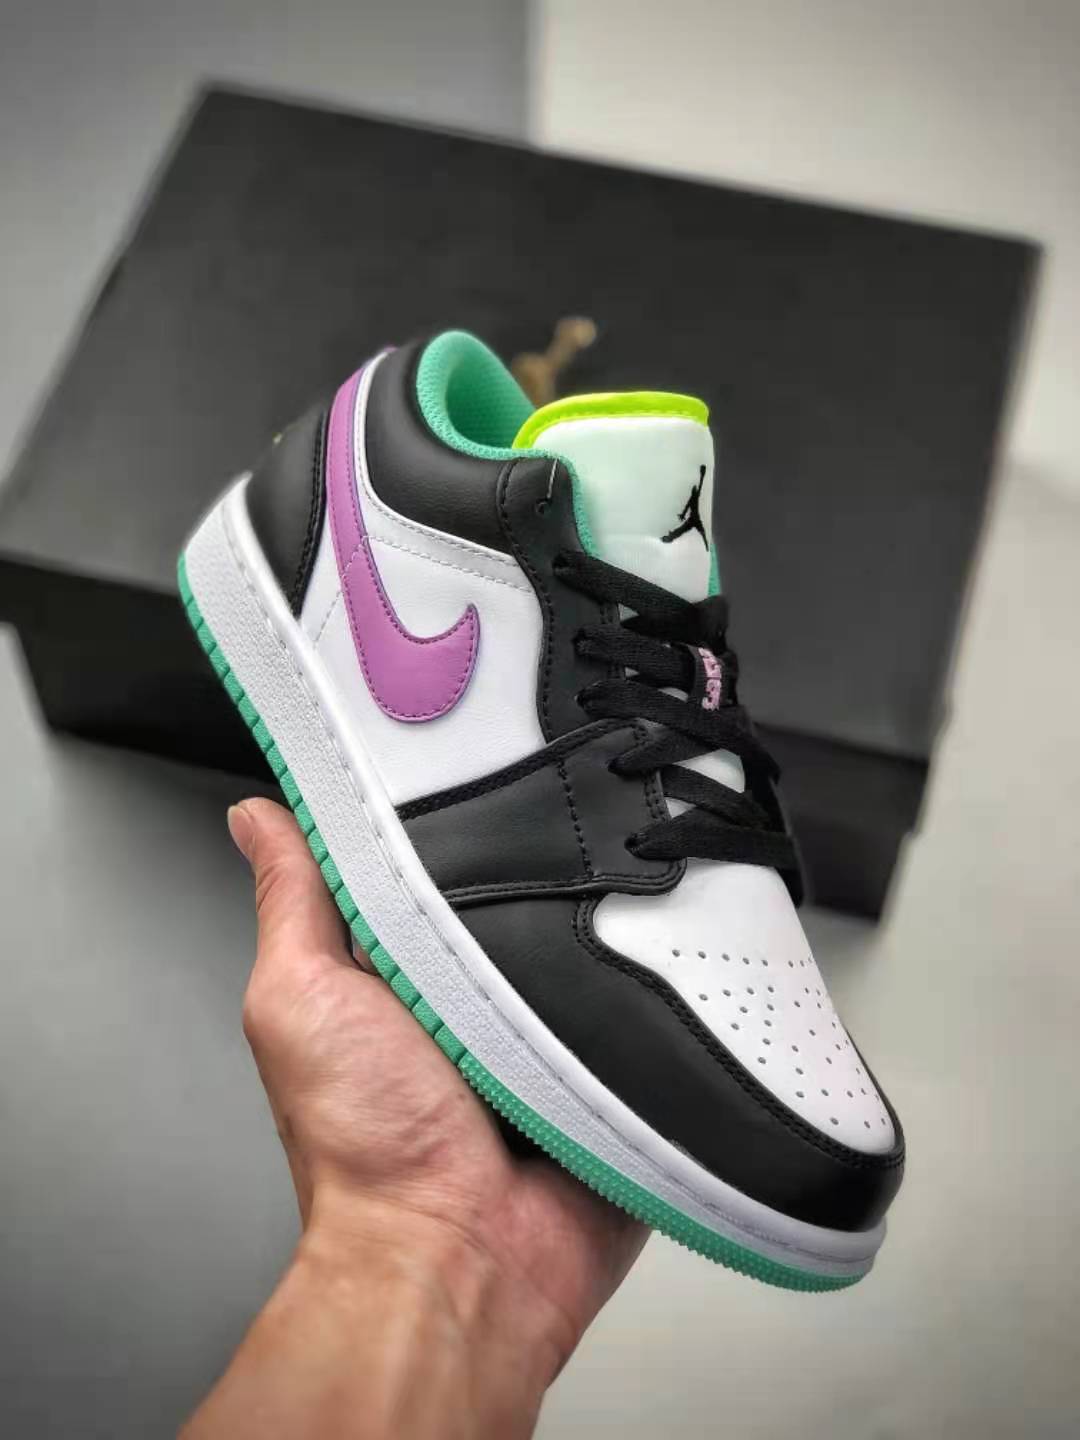 Air Jordan 1 Low 'White Violet Shock' 553560-151 - Stylish and Vibrant Sneakers for Ultimate Style